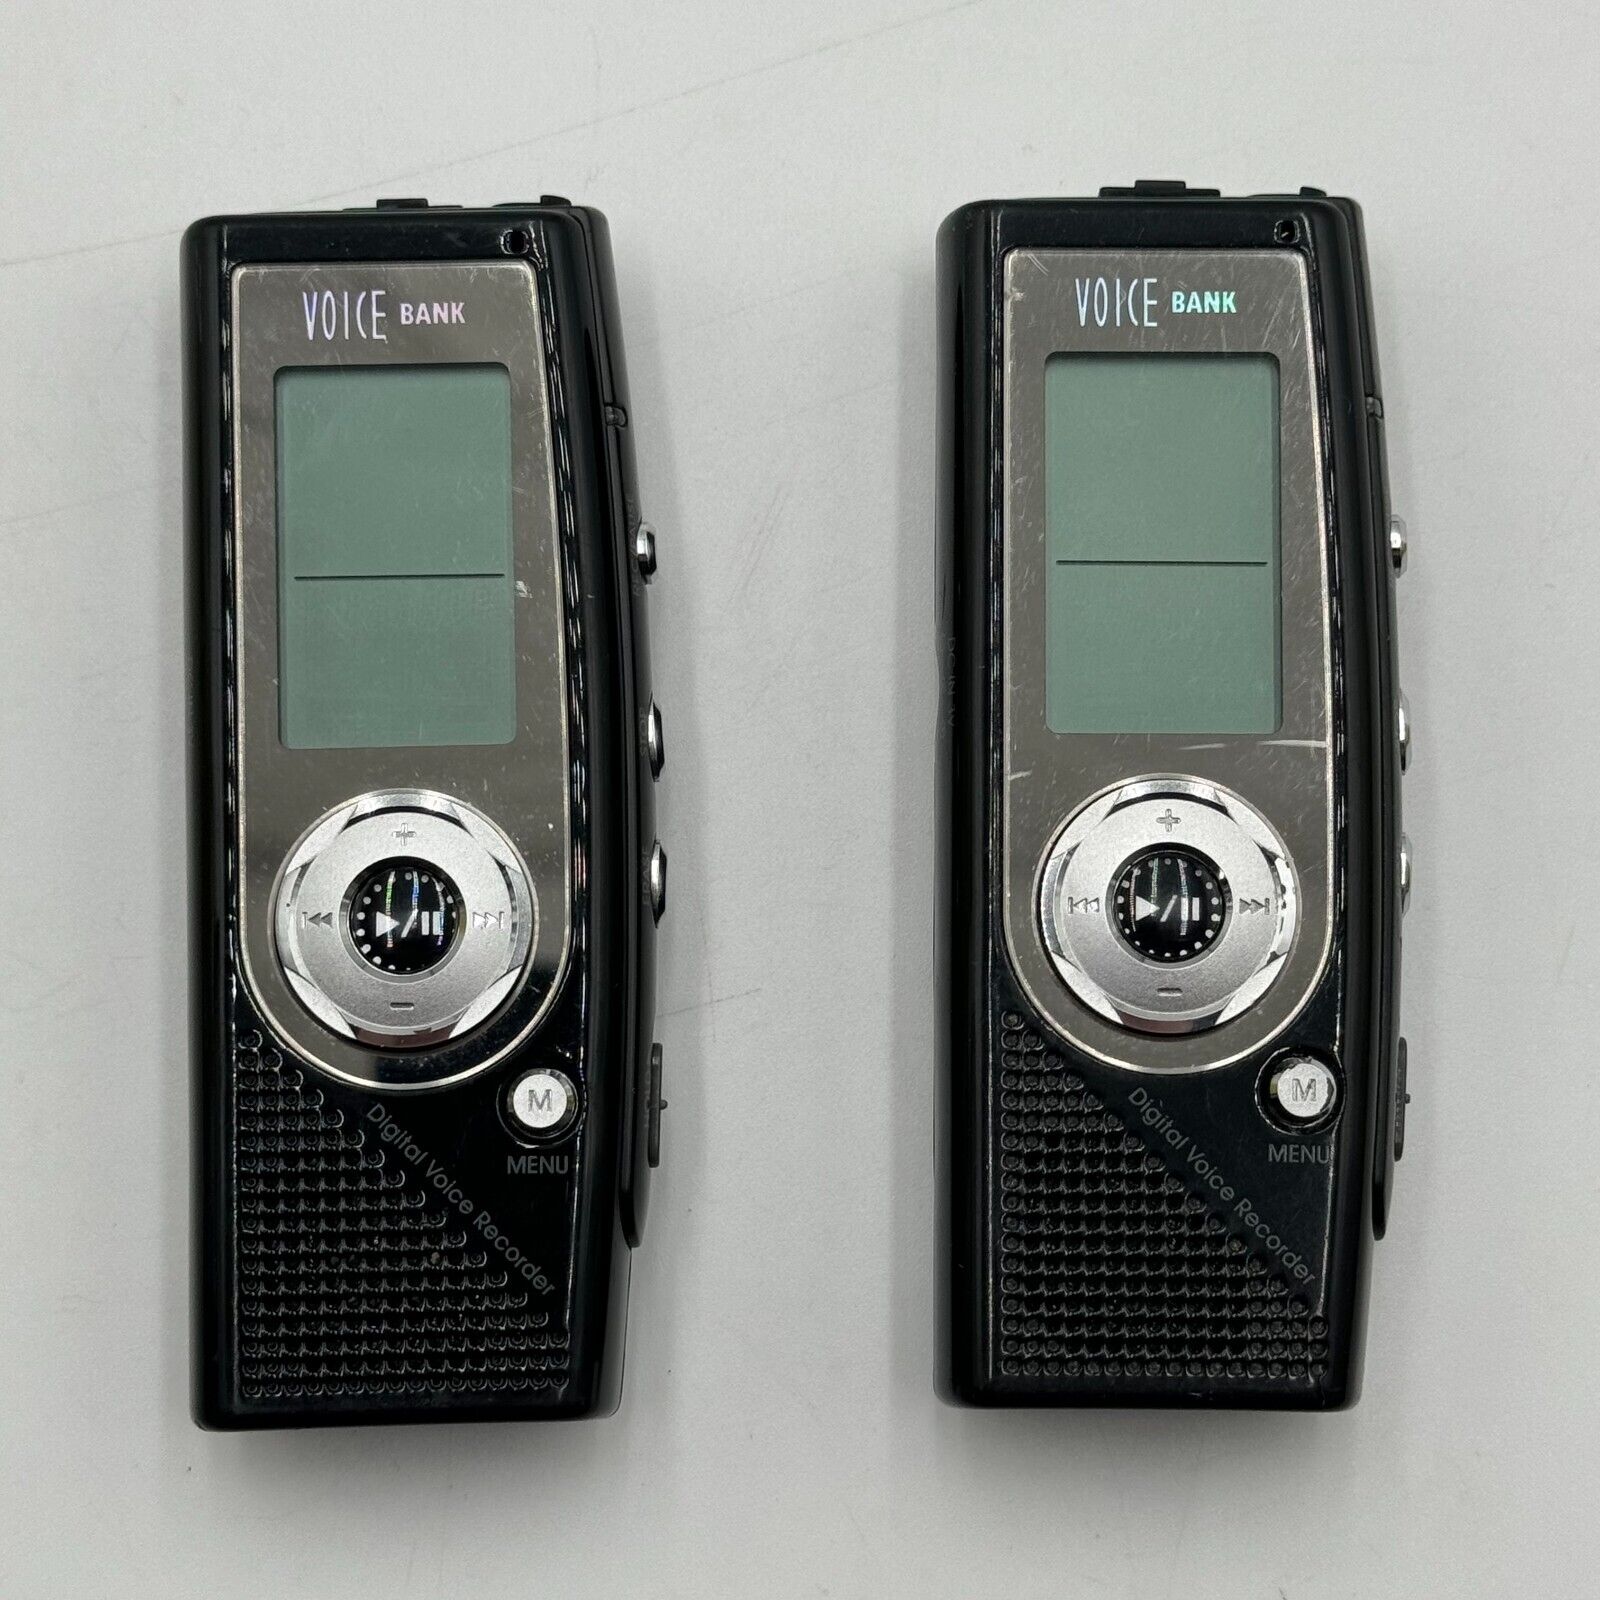 Voice Bank Pair of 2 Digital Voice Recorders Diasonic DDR-5000 with Lanyard